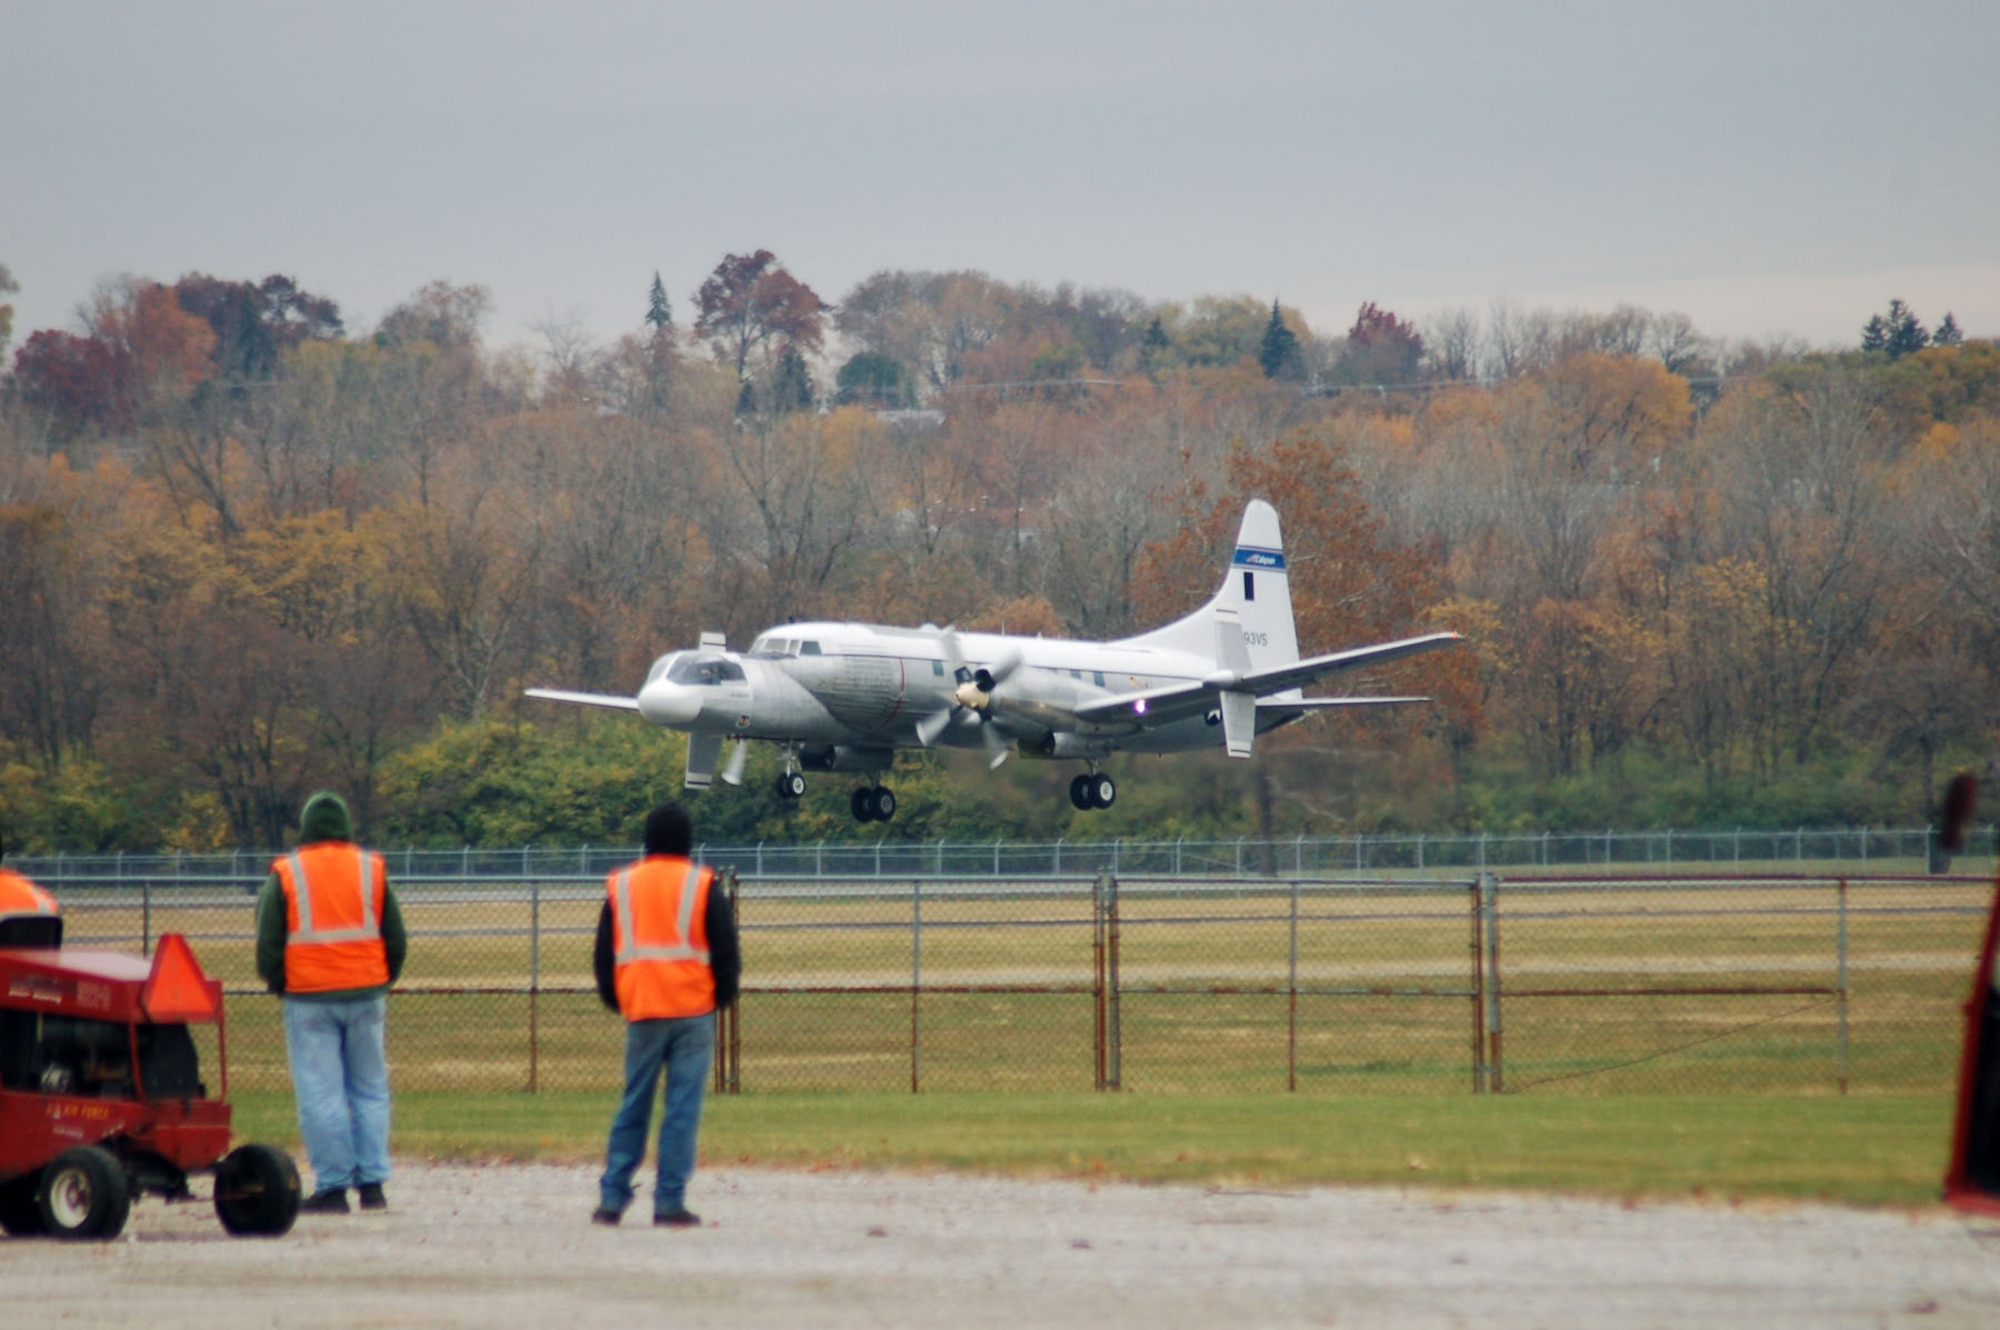 DAYTON, Ohio -- Bill Weldon of Enon, Ohio, took this photo of the Convair NC-131H as it landed at the National Museum of the United States Air Force on Nov. 7, 2008. (Photo courtesy of Bill Weldon)